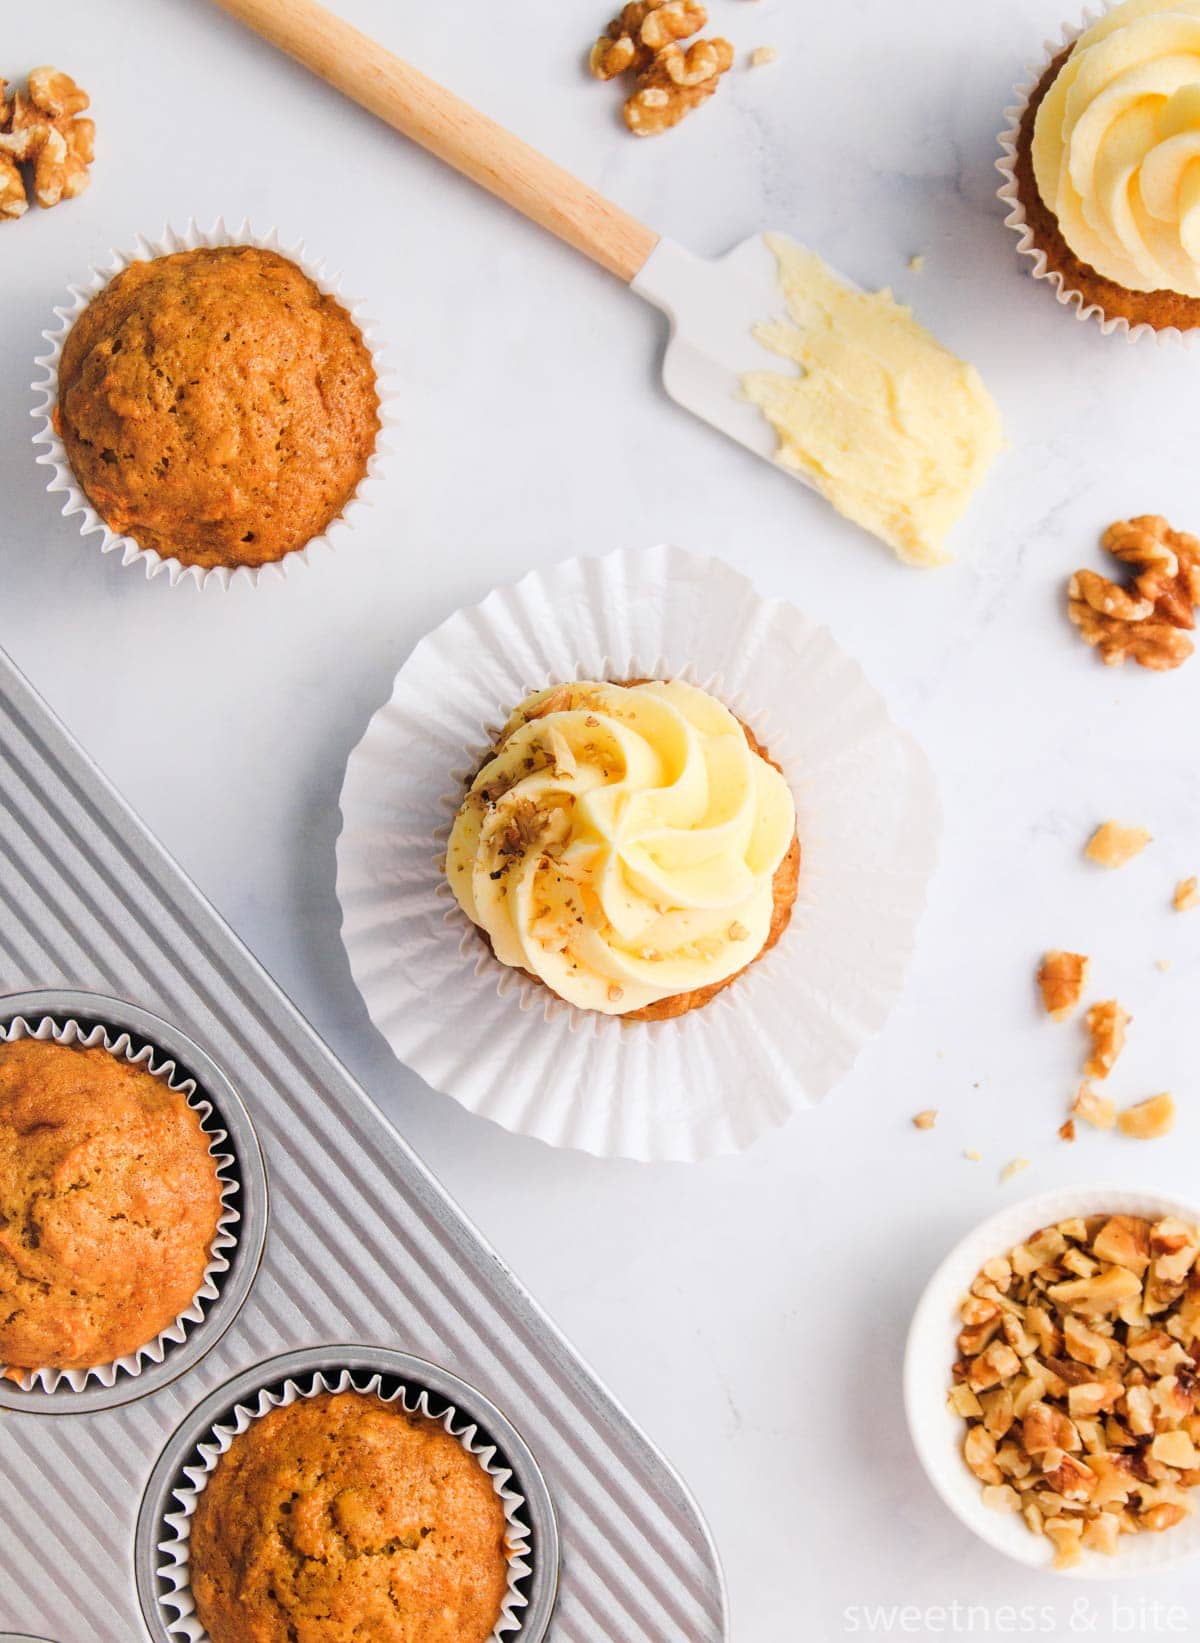 A flat-lay showing several carrot cupcakes, some iced and some uniced, with scattered walnuts and a spatula spread with cream cheese icing, on a grey marble background.